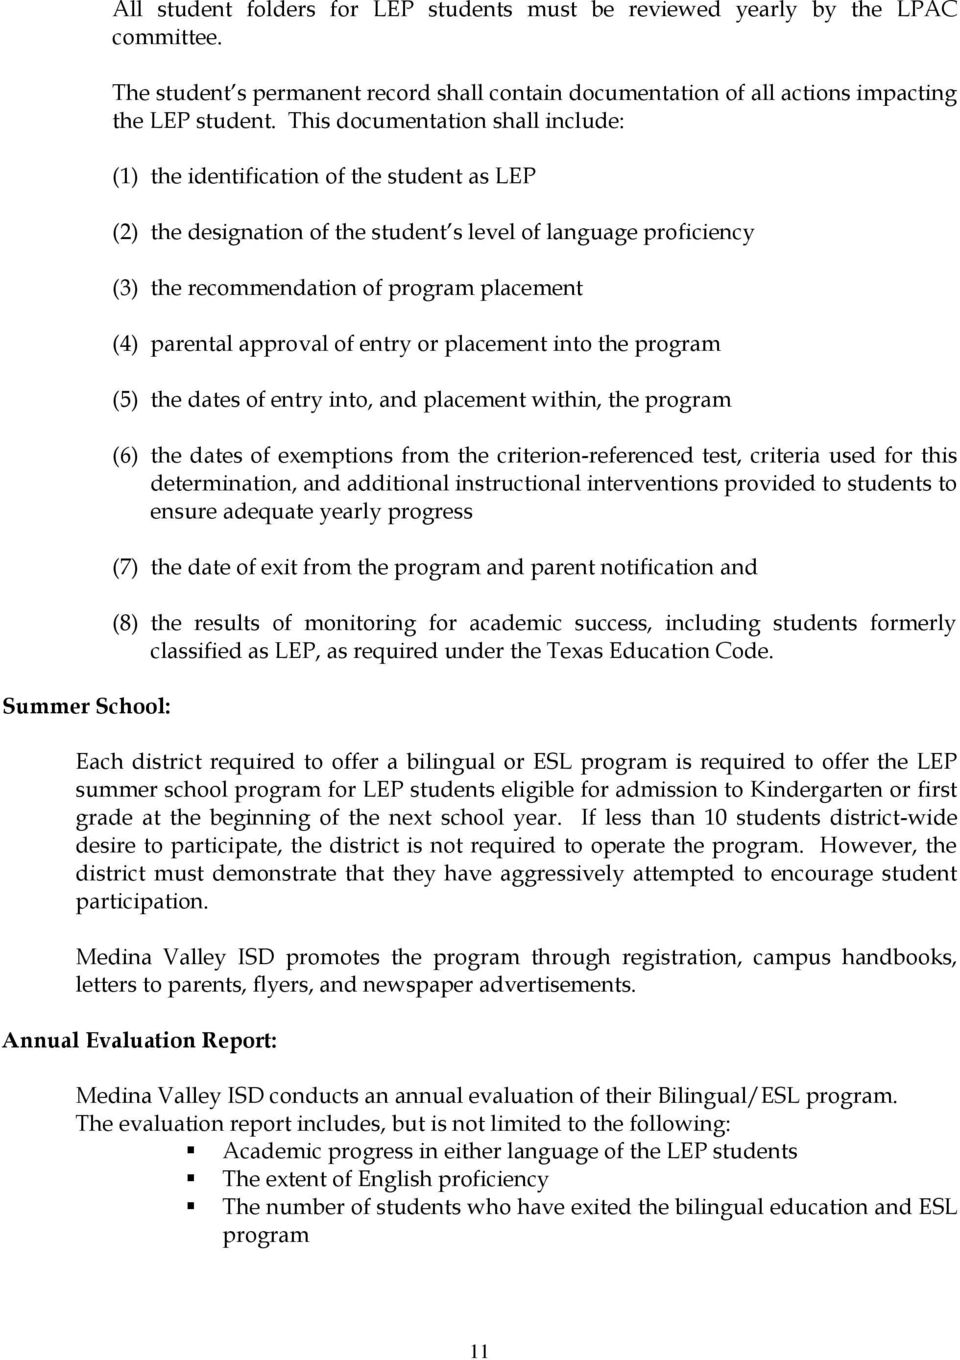 parental approval of entry or placement into the program (5) the dates of entry into, and placement within, the program (6) the dates of exemptions from the criterion-referenced test, criteria used